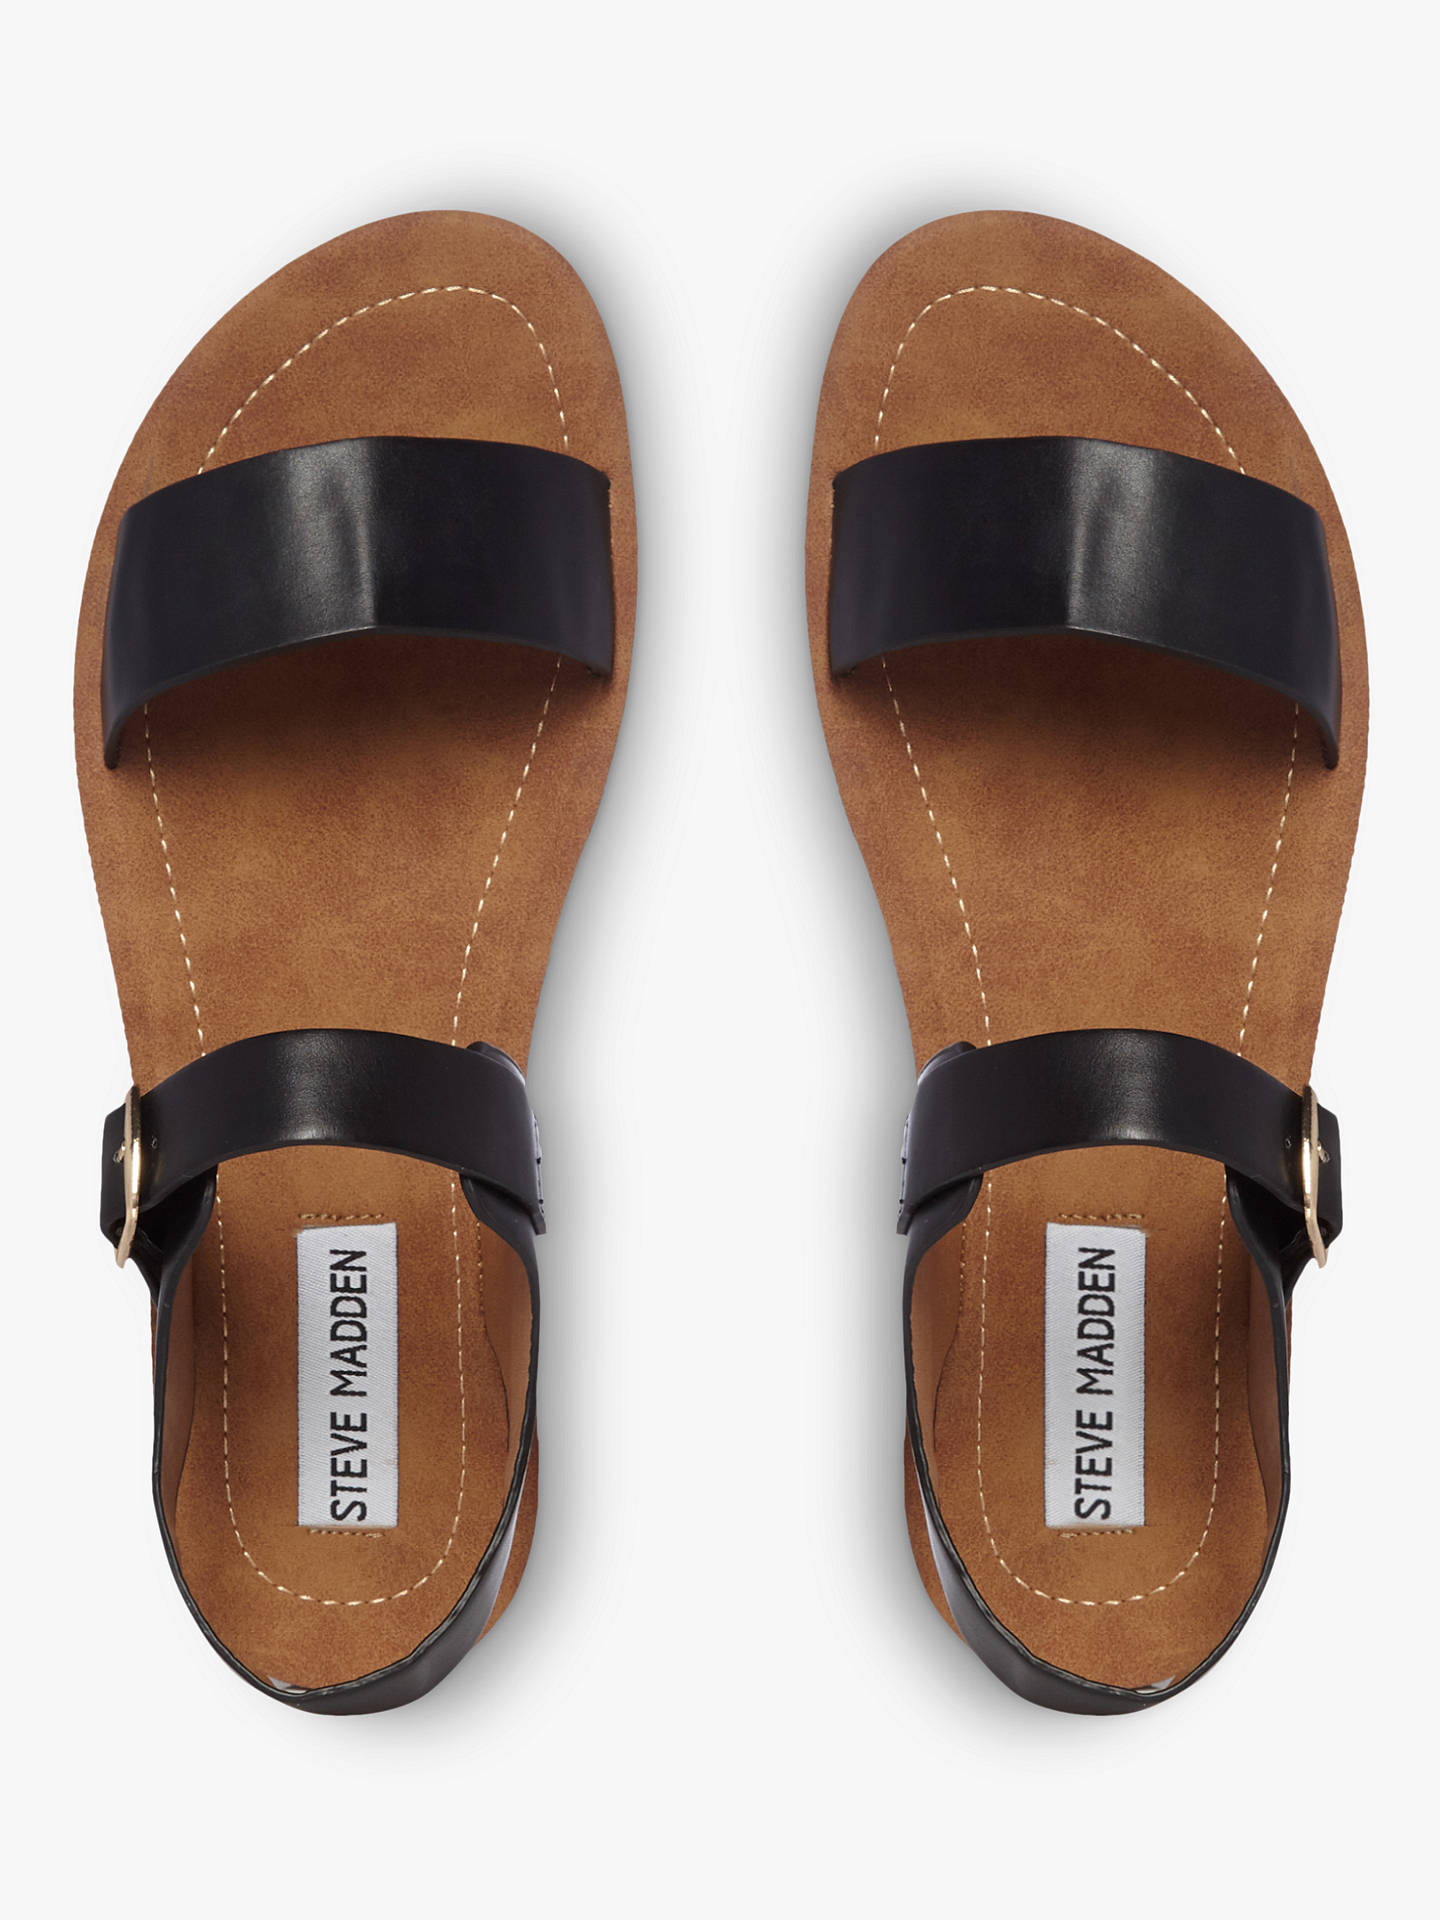 Steve Madden Probable Two Part Flat Sandals at John Lewis & Partners